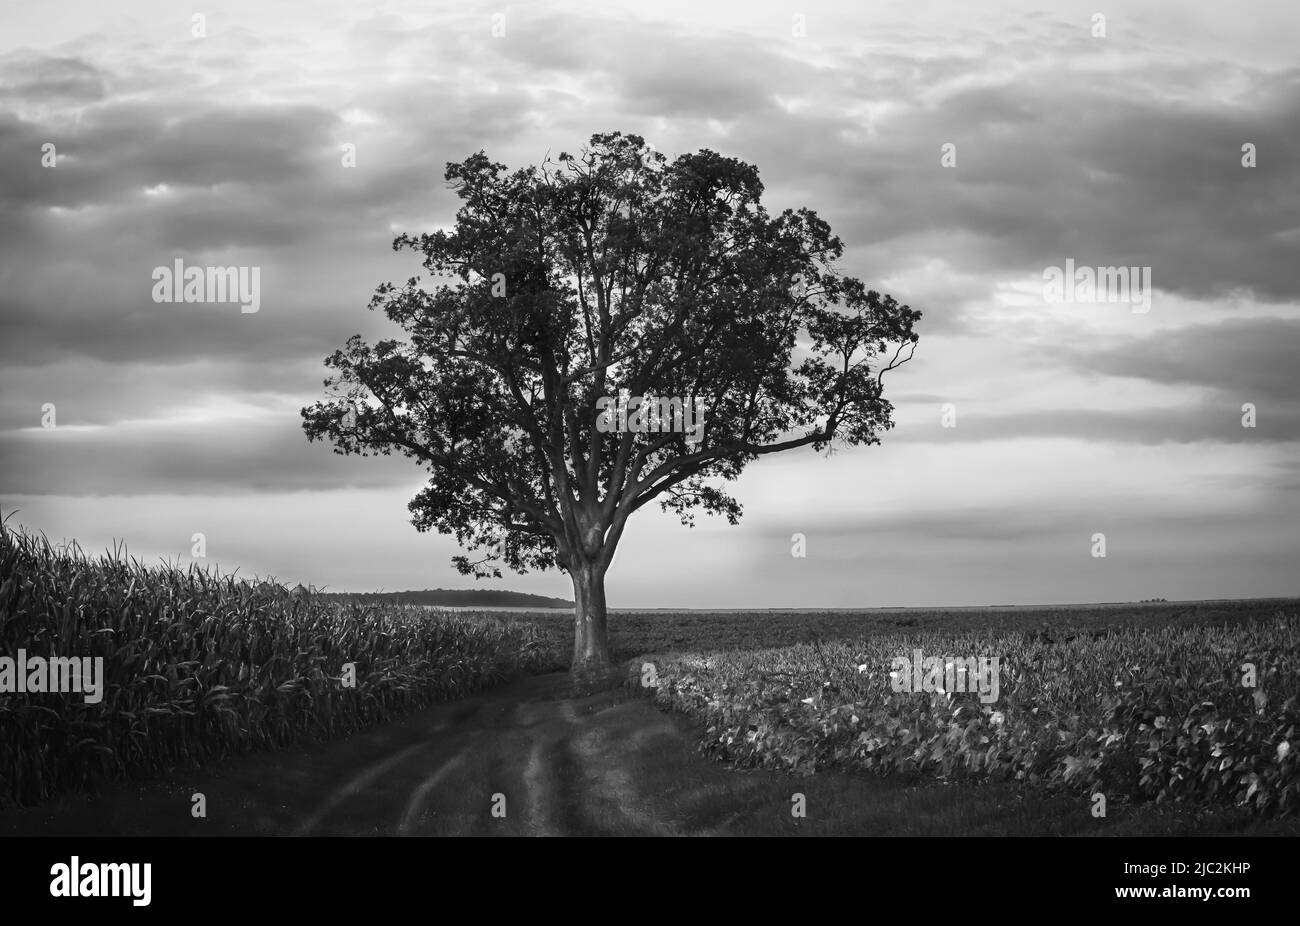 A lone oak tree standing in the middle of a field dividing a soybean field and a corn field with a clouded sky in the background, fall, Pennsylvania Stock Photo